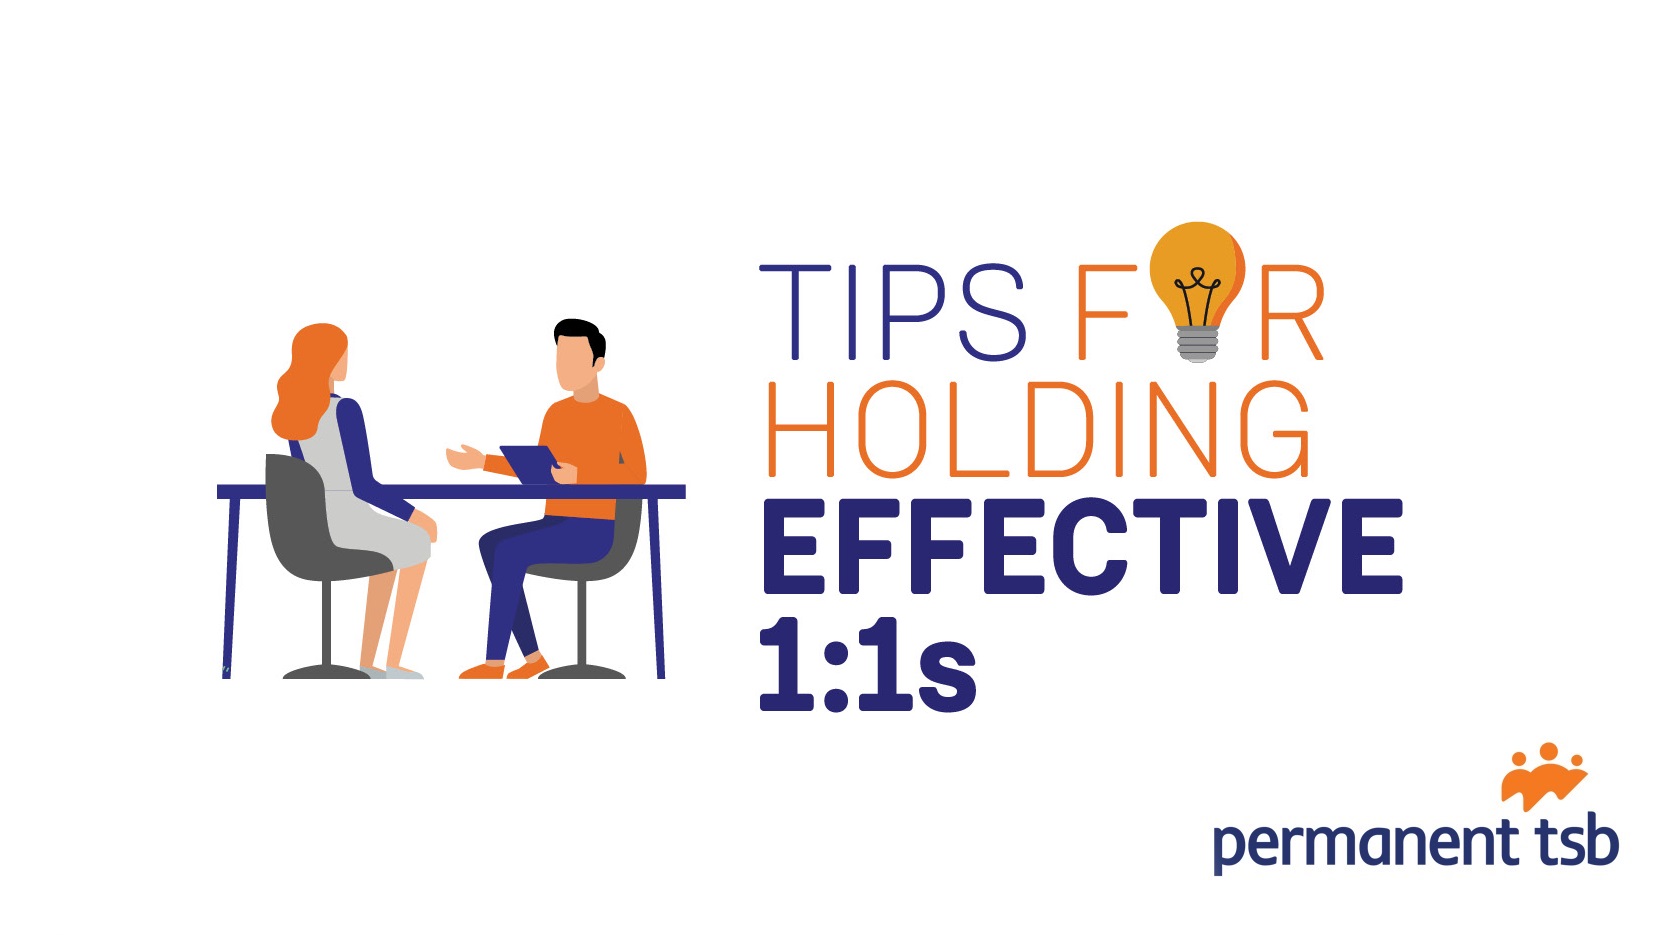 Tips for Effective 1:1s